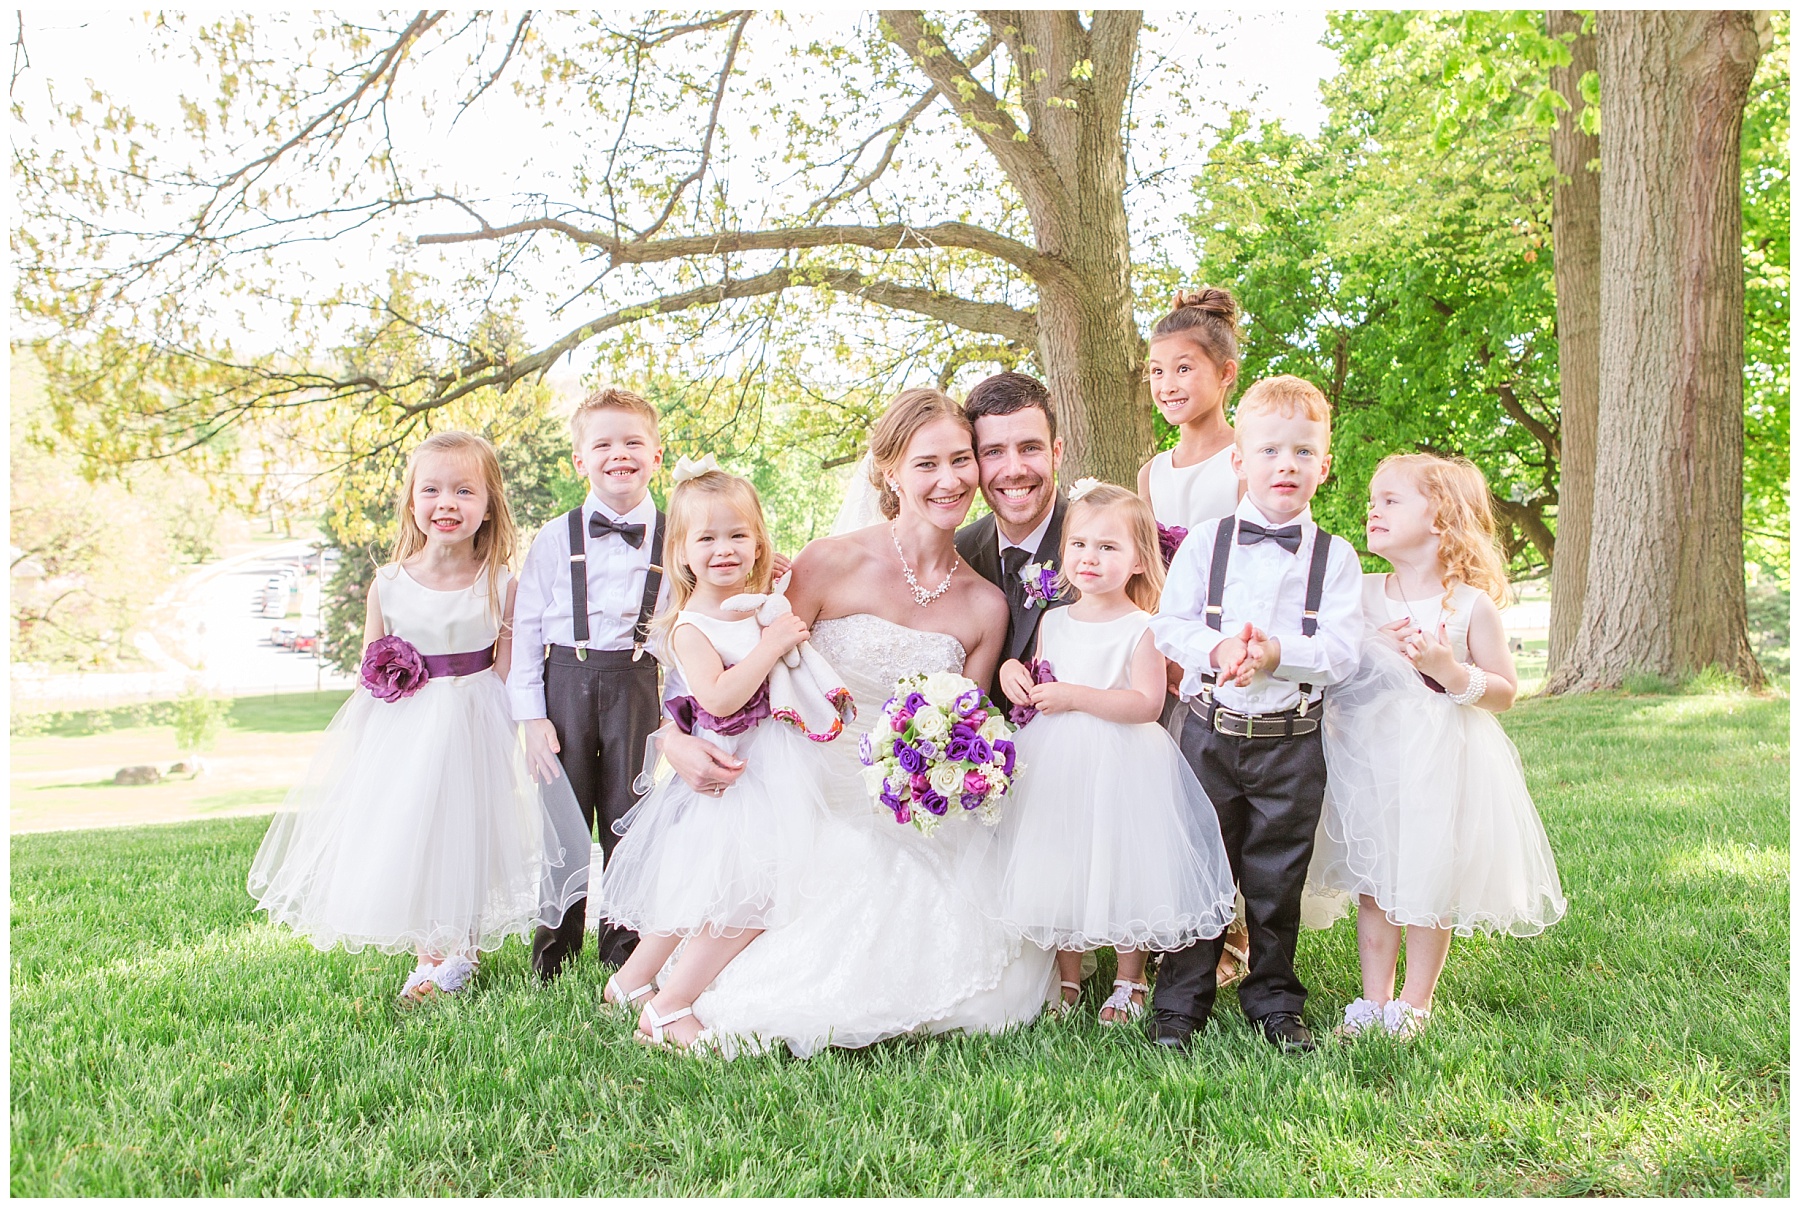 tips for including children in the wedding party, Samantha Ludlow Photography, Syracuse photographer, Syracuse wedding photographer, Finger Lakes wedding photographer